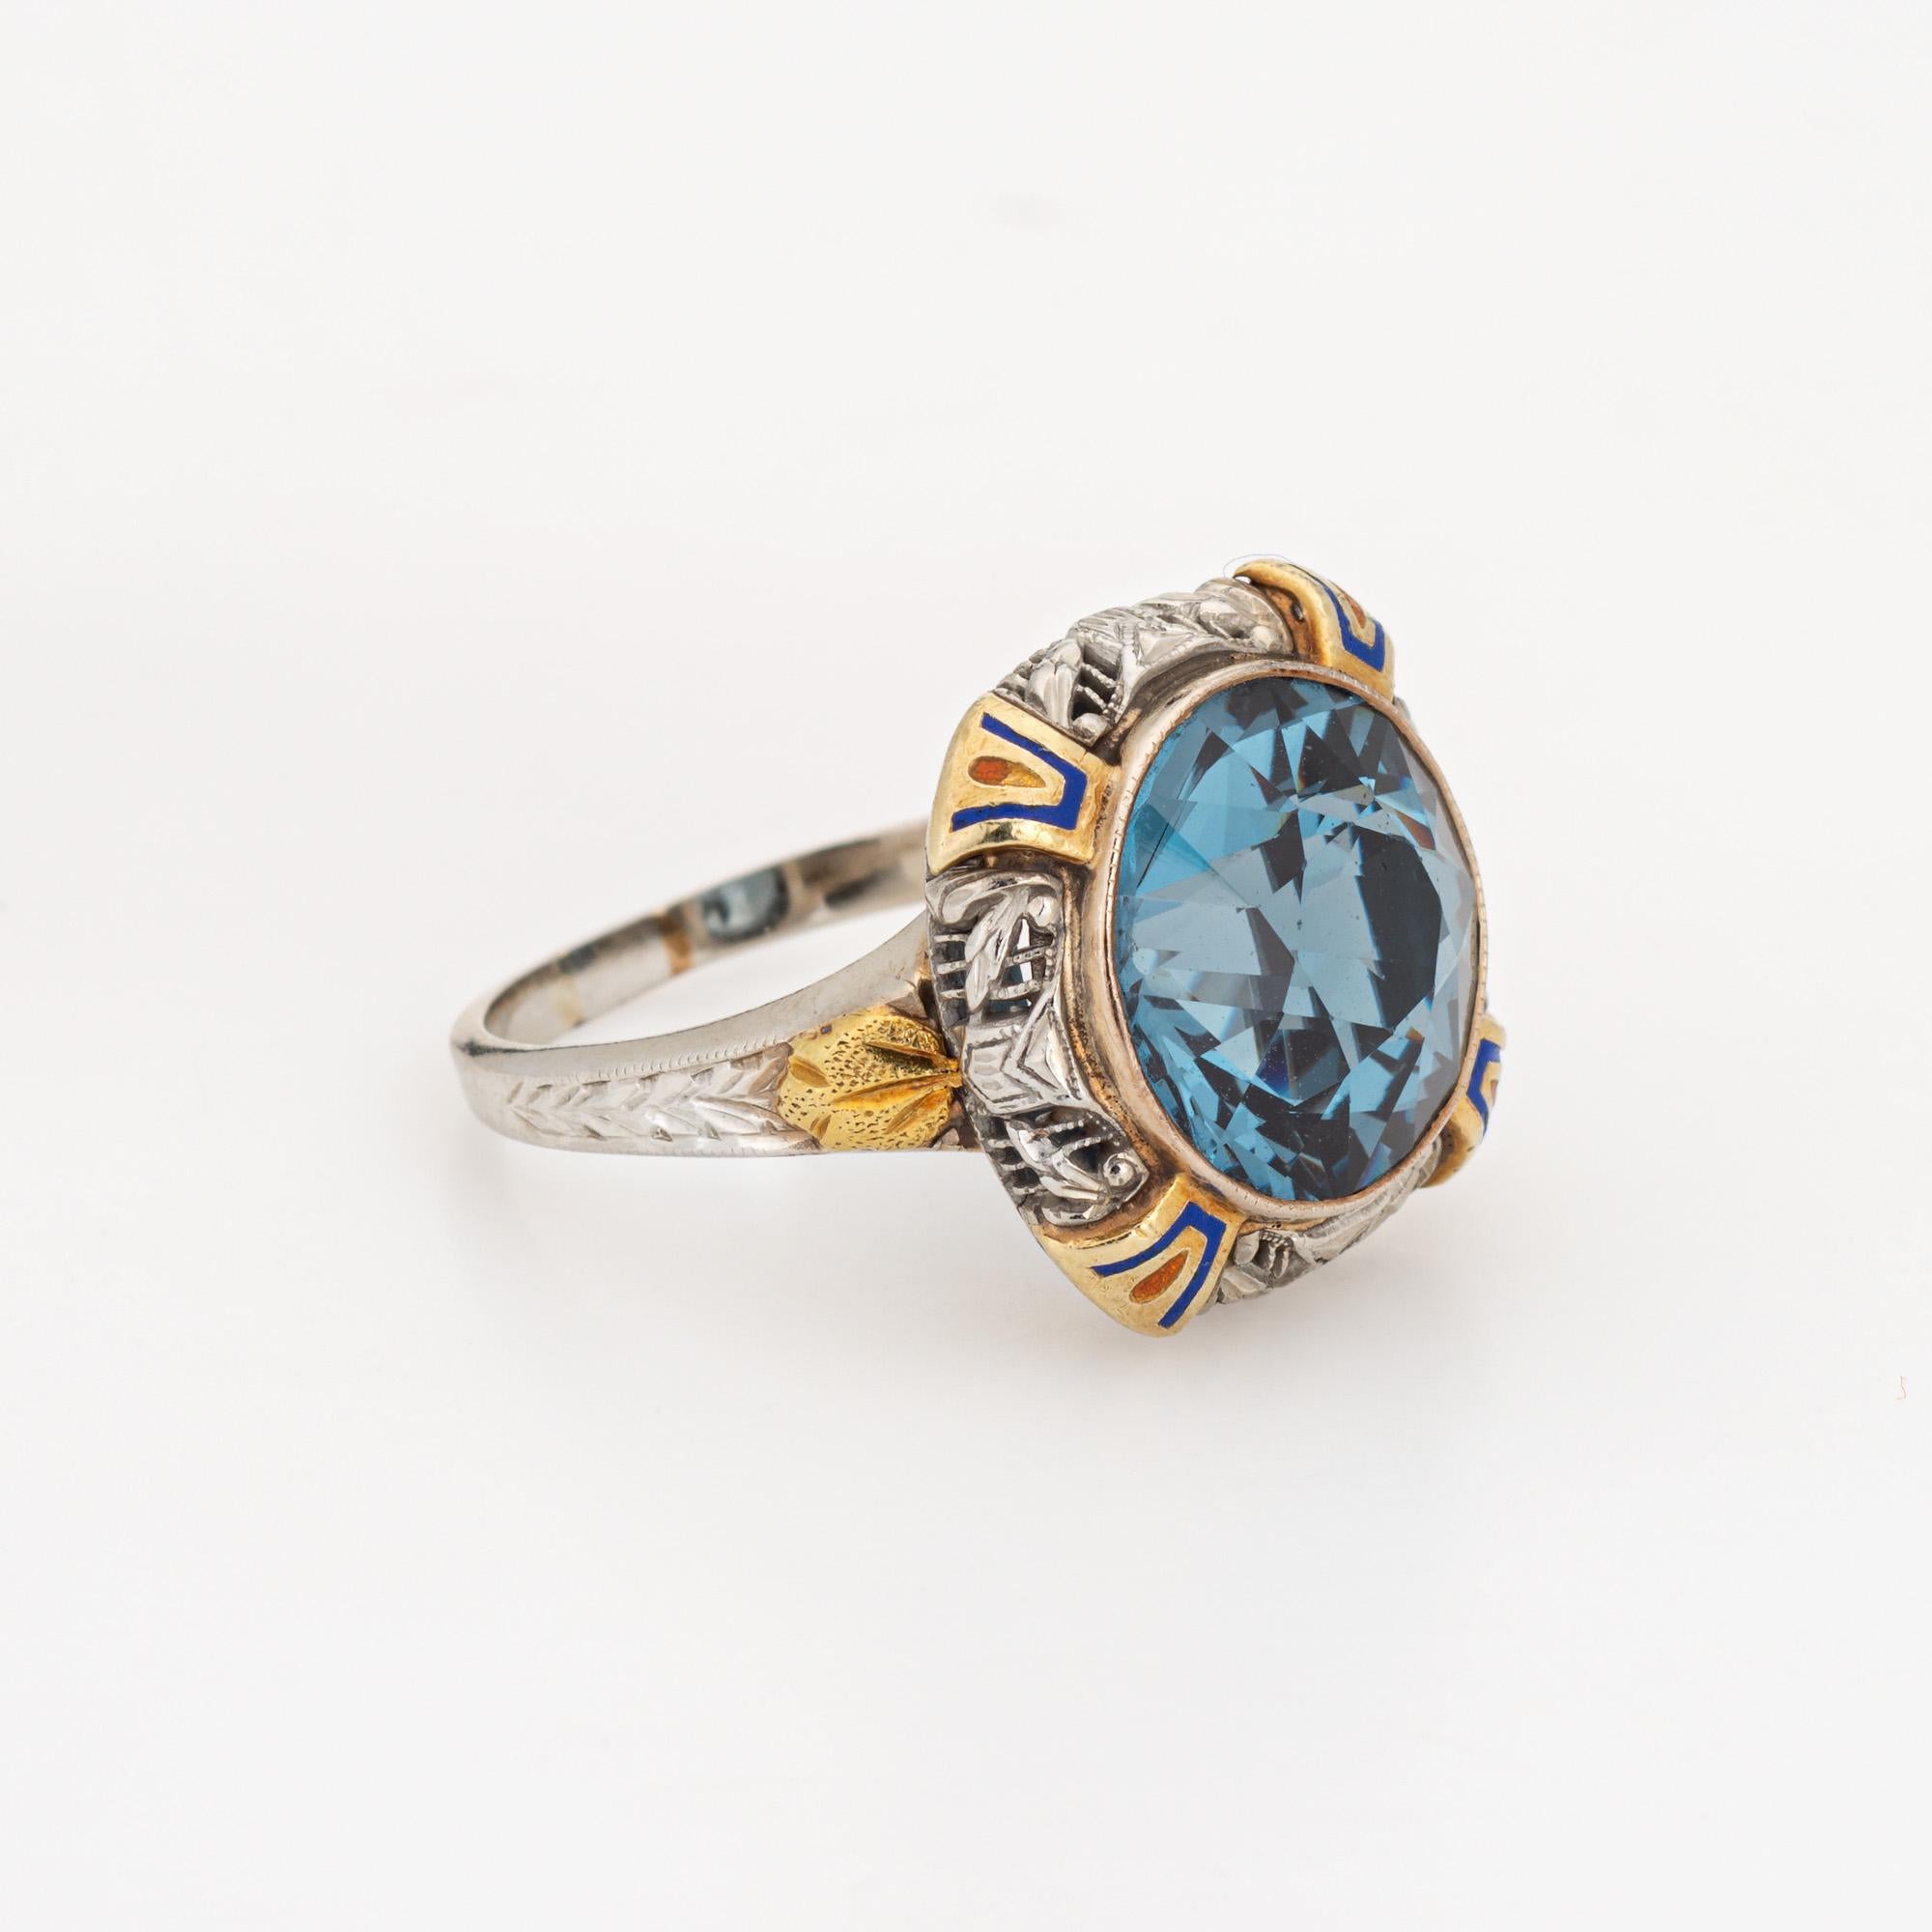 Vintage Art Deco Enamel Cocktail Ring 14k Gold Filigree Jewelry Blue Stone  In Good Condition For Sale In Torrance, CA